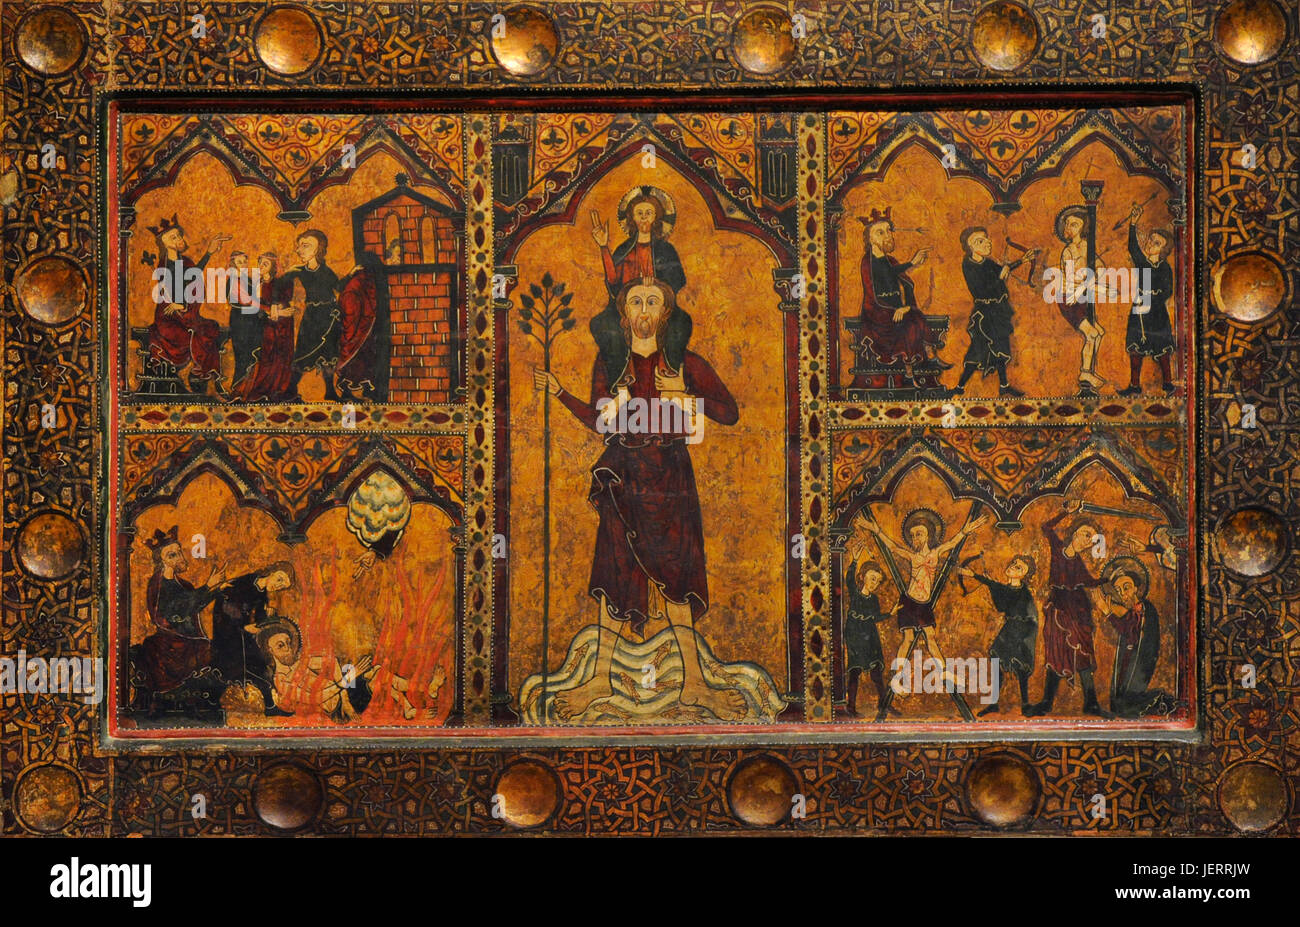 Master of Soriguerola. Altar frontal of Saint Christopher, 14th century. Gothic. From the Parish Church of Sant Cristofol de Toses, Catalonia. National Art Museum of Catalonia. Barcelona. Catalonia. Spain. Stock Photo